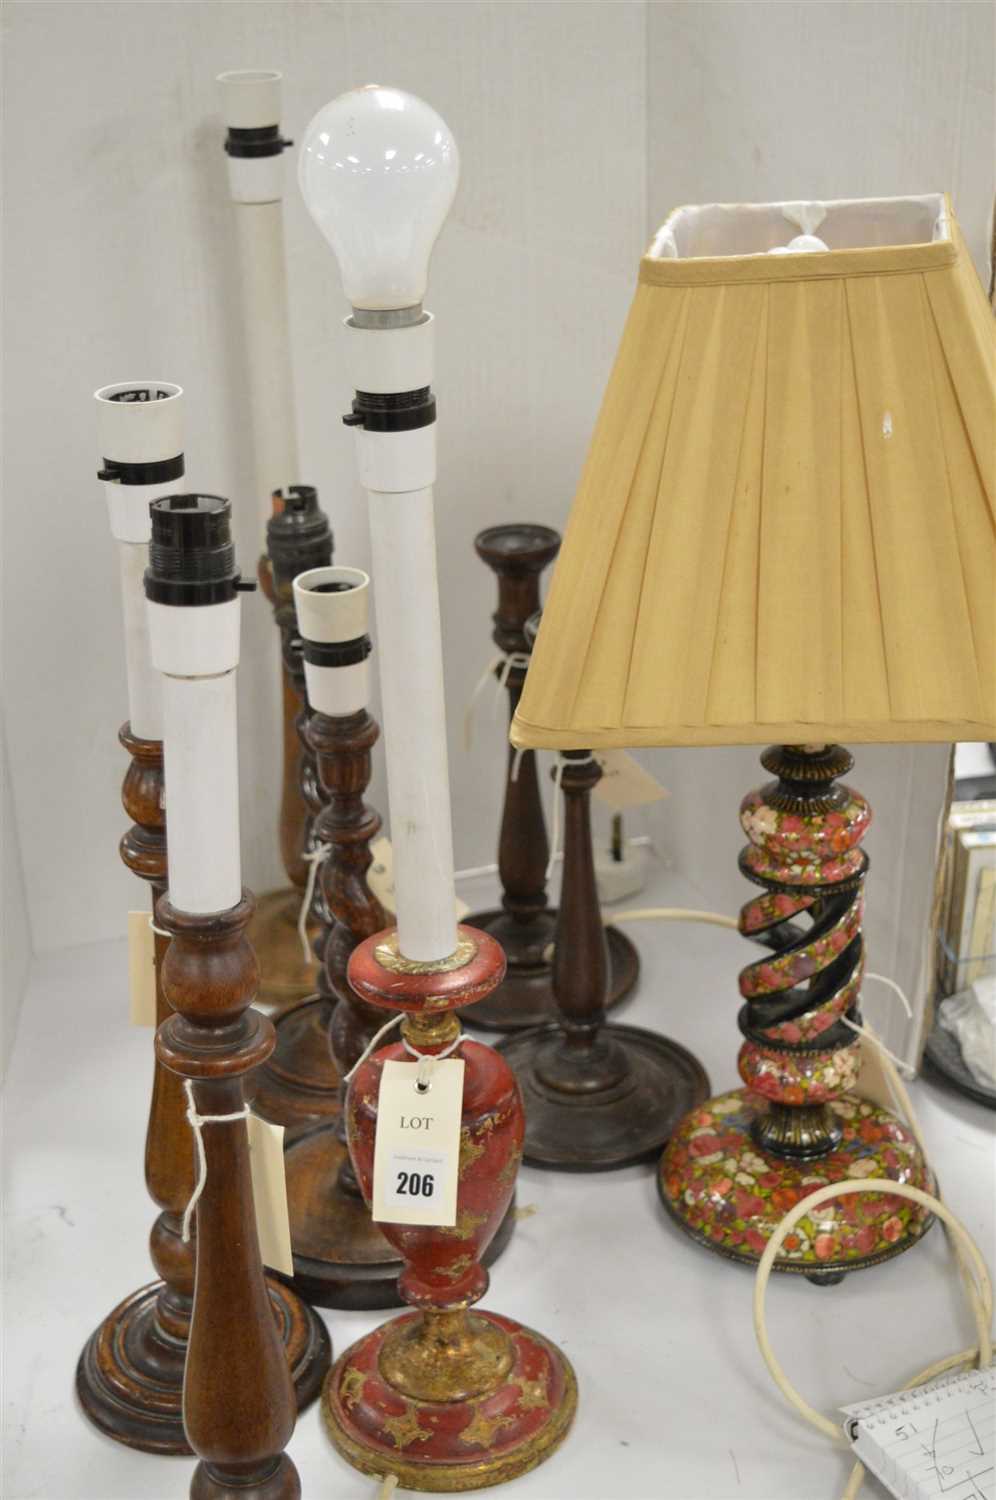 Lot 206 - Table lamps